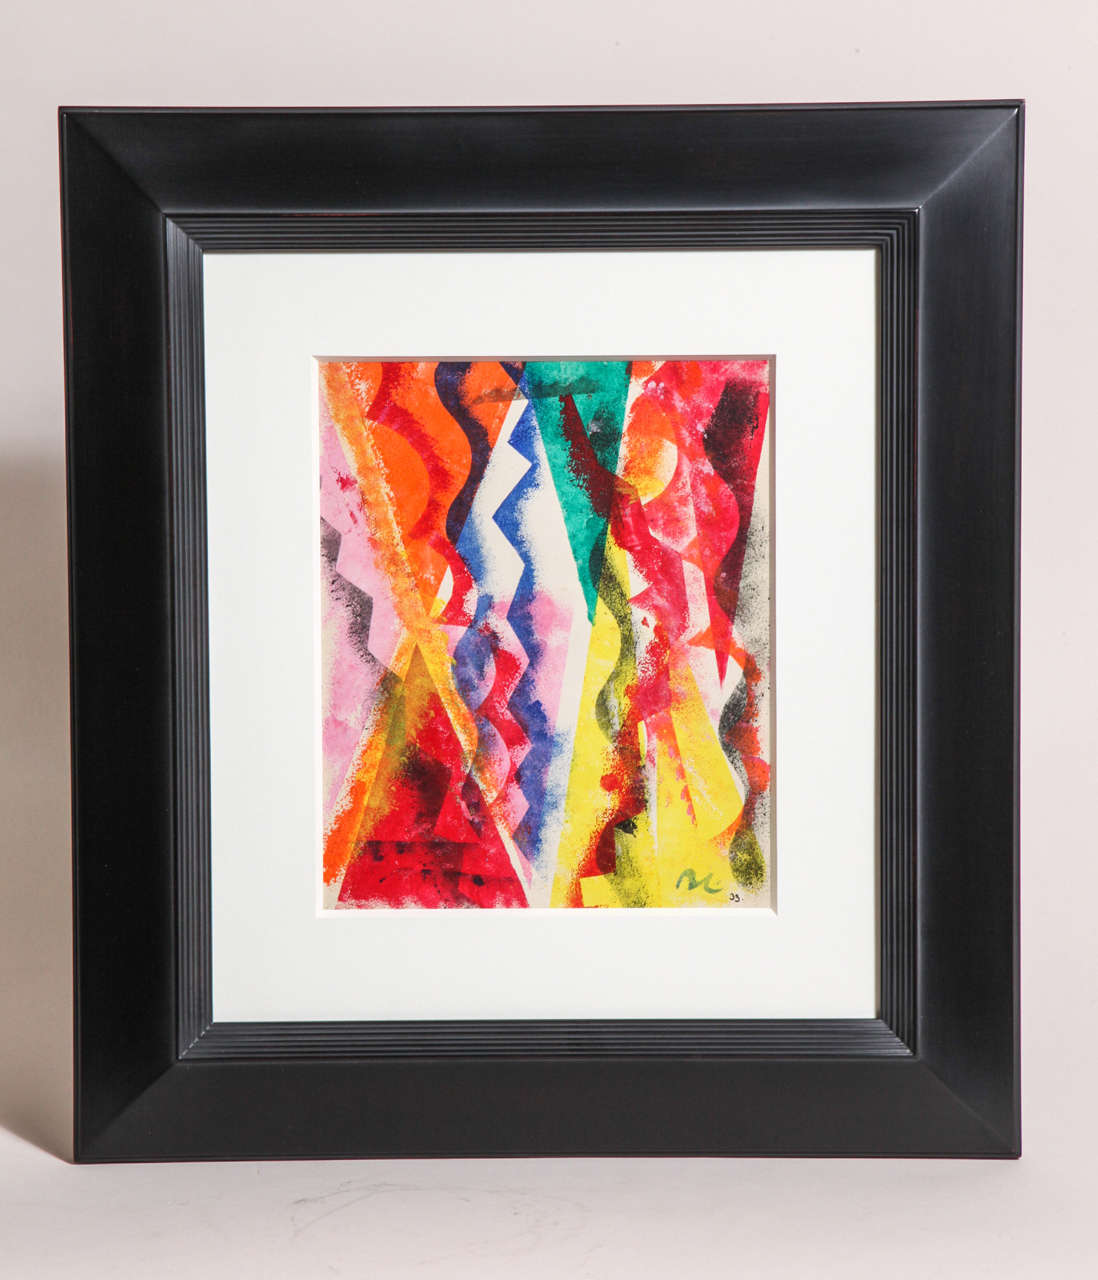 Custom framed with mat and museum glass.
With abstract zig zag design
Signed BL 33

Image: 9 3/8” wide; 11 ½” high.